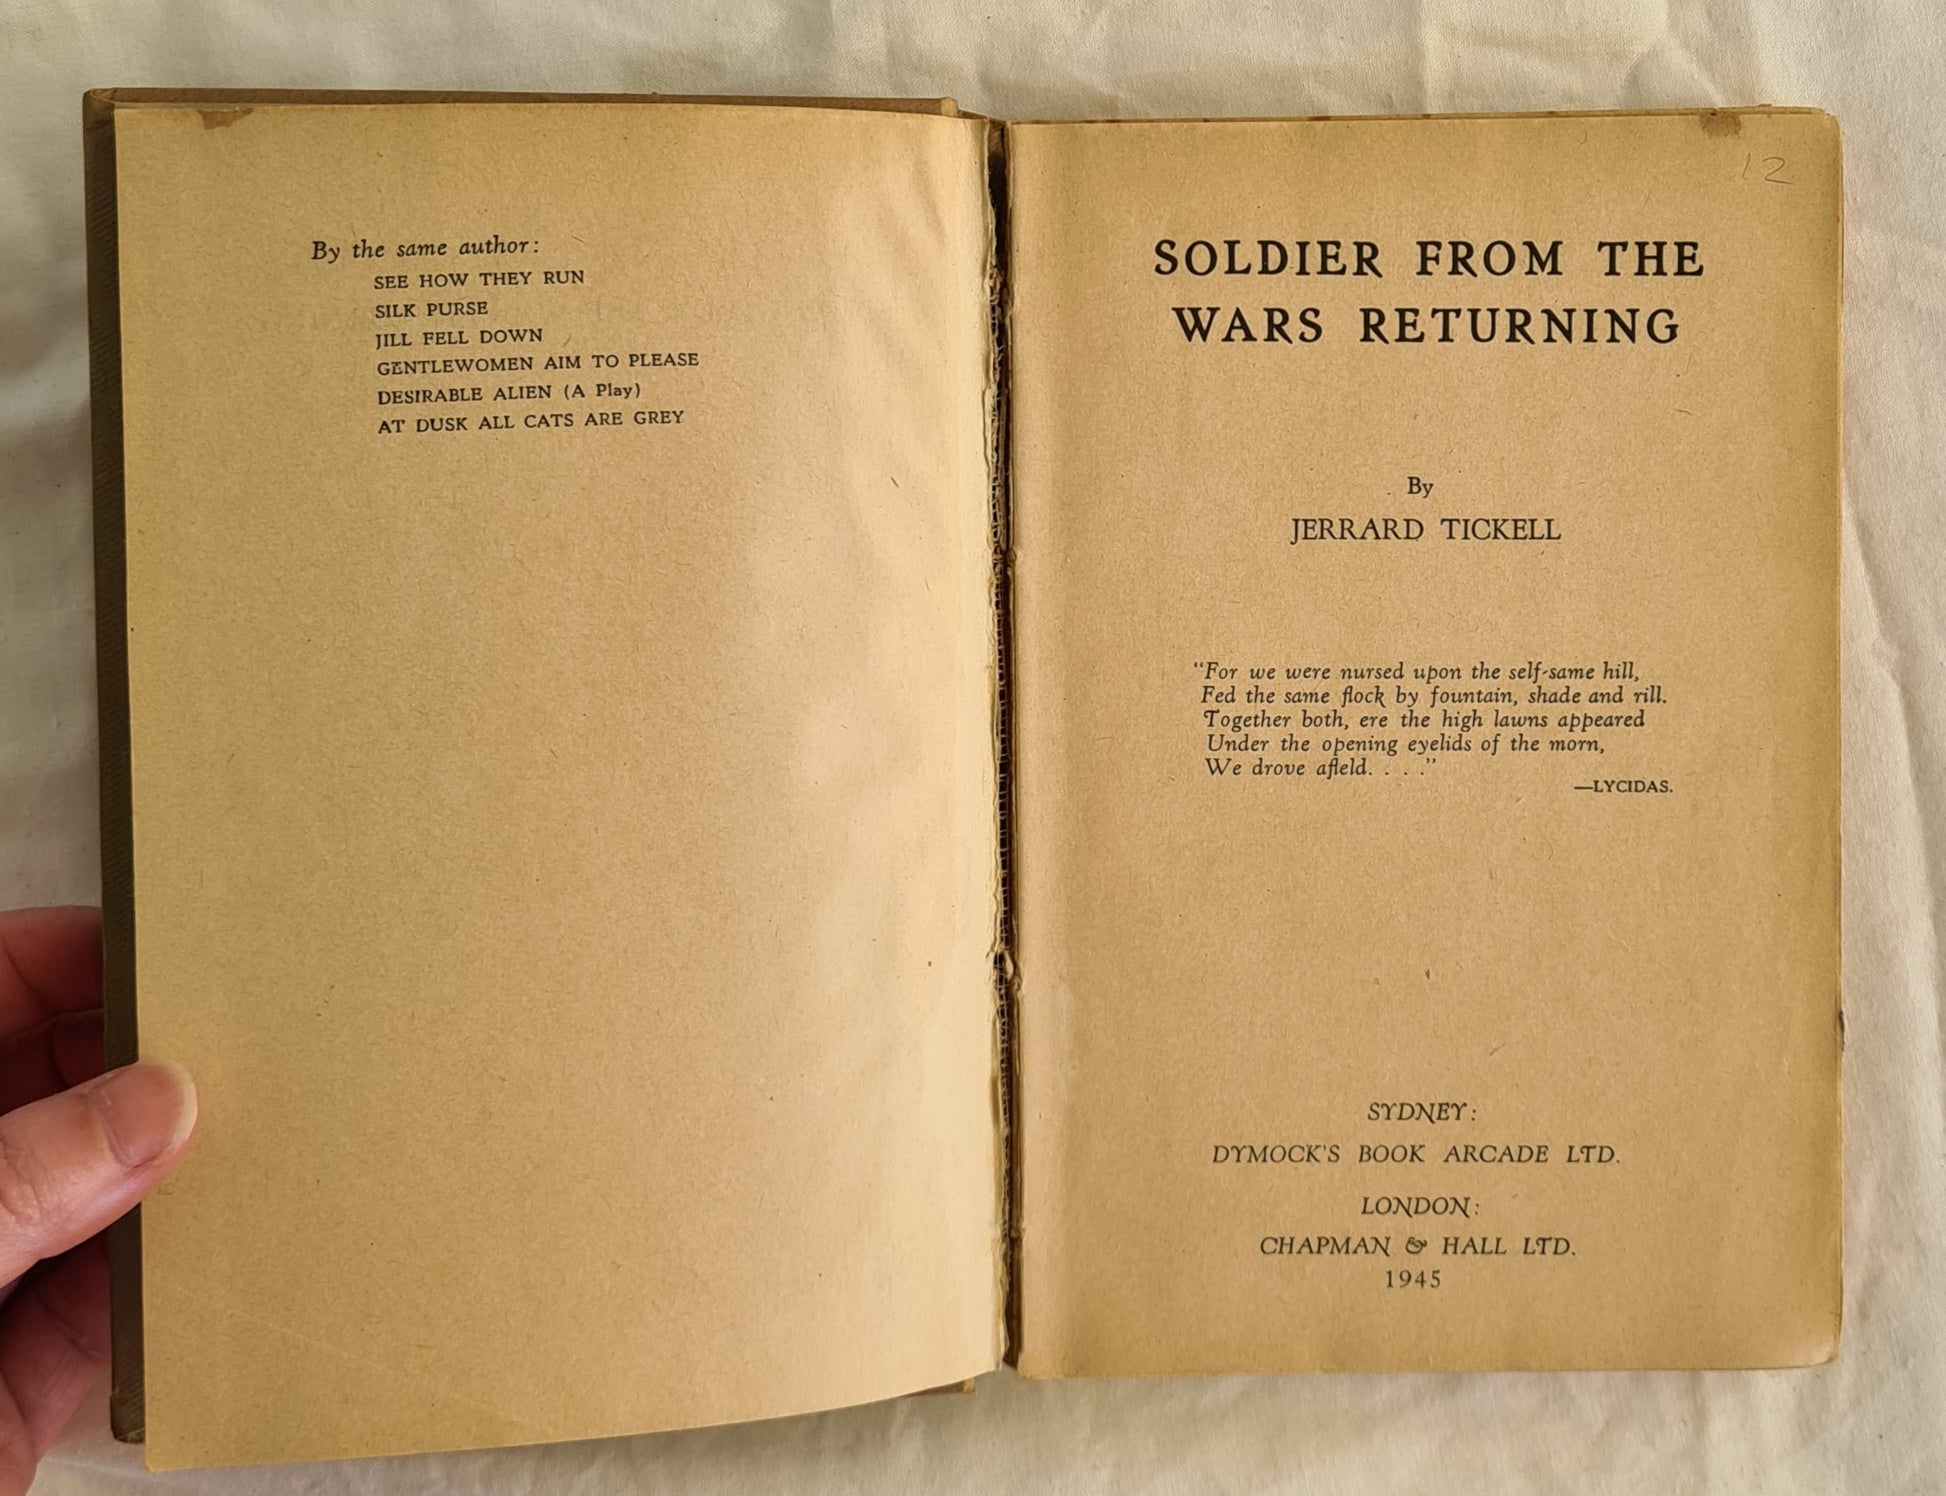 Soldier from the Wars Returning by Jerrard Tickell